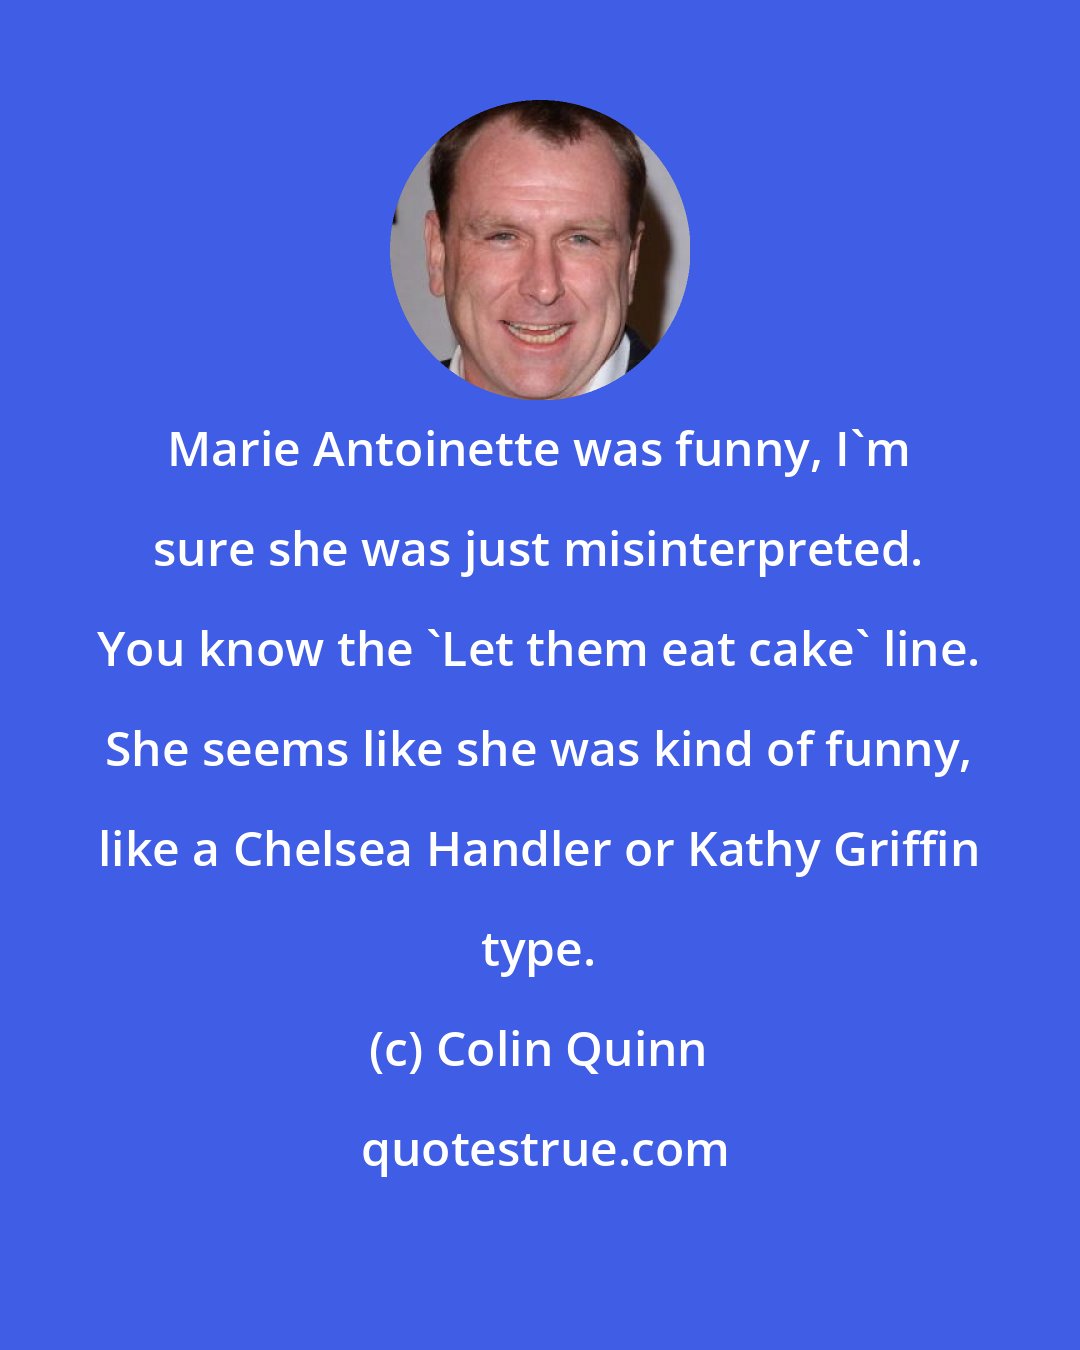 Colin Quinn: Marie Antoinette was funny, I'm sure she was just misinterpreted. You know the 'Let them eat cake' line. She seems like she was kind of funny, like a Chelsea Handler or Kathy Griffin type.